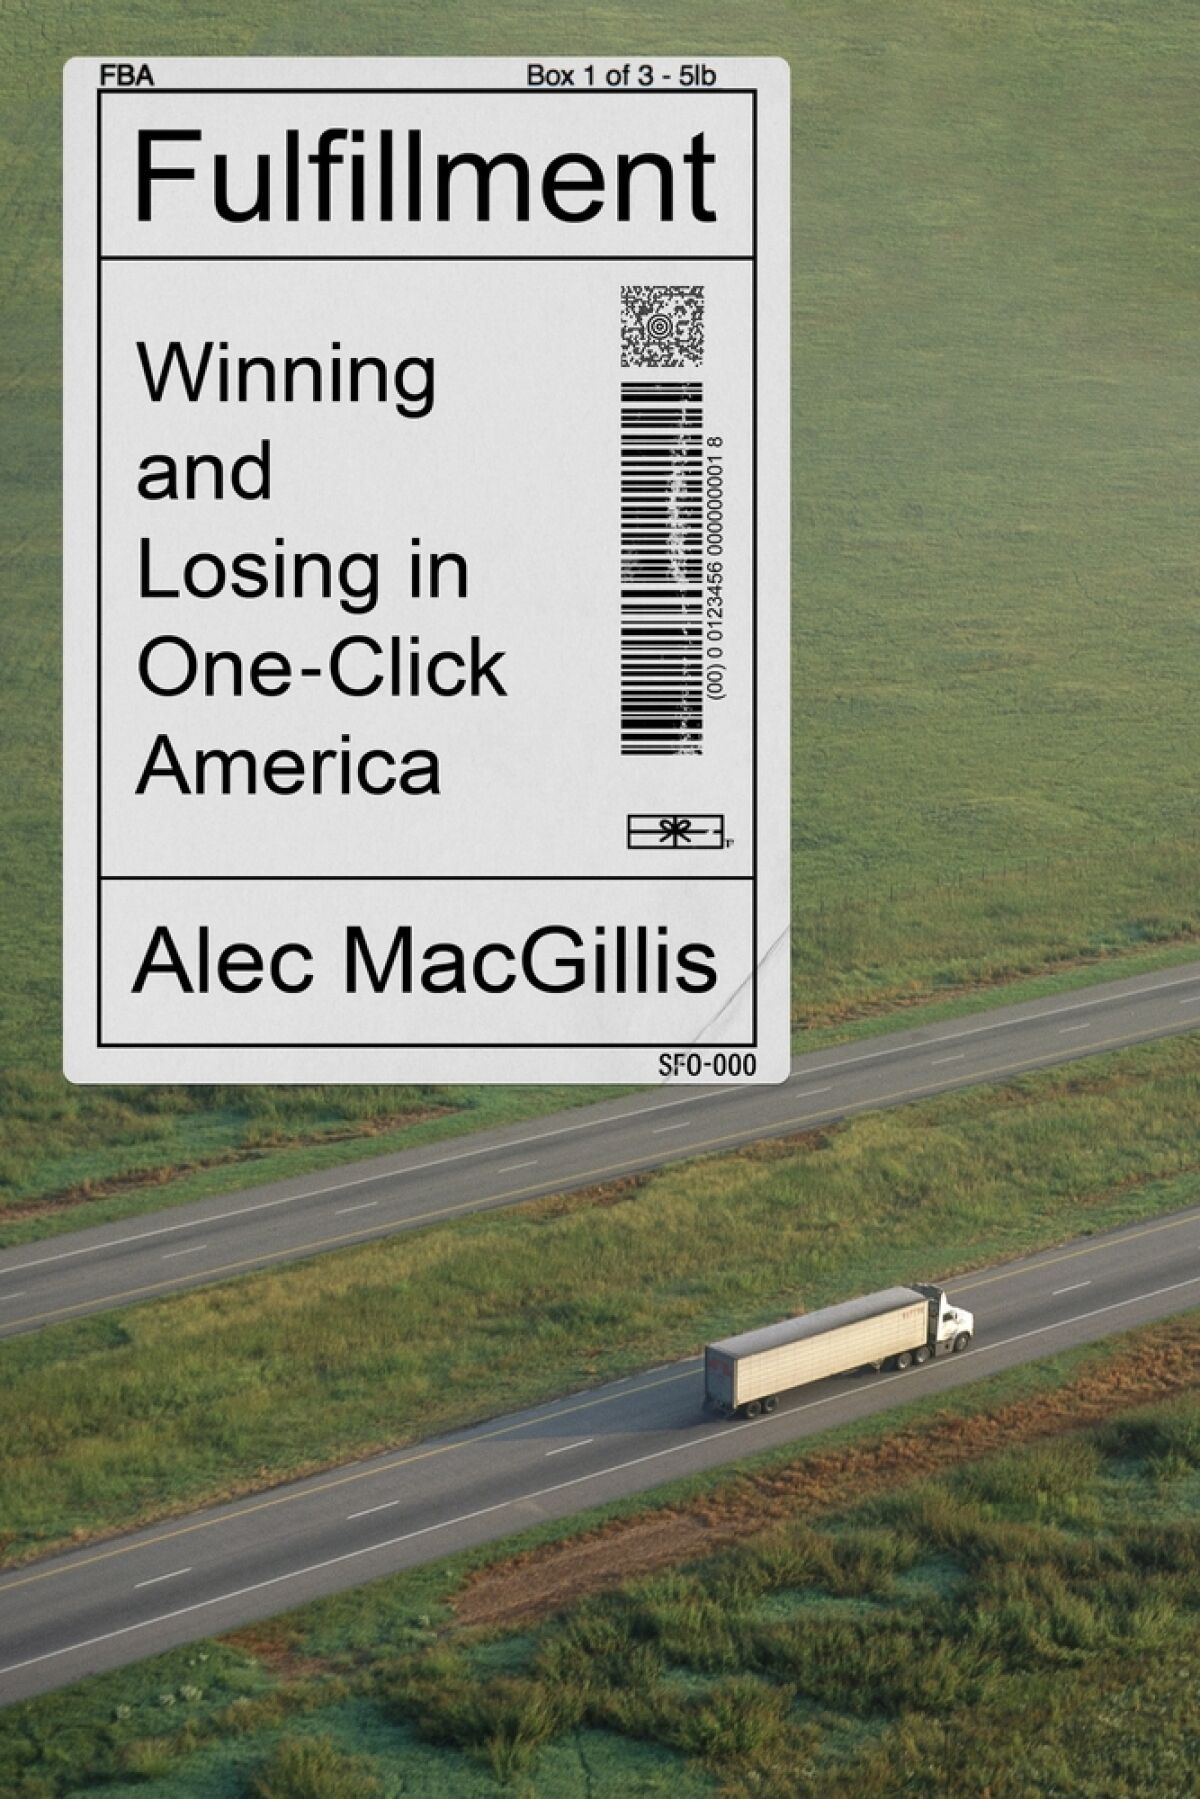 The book "Fulfillment: Winning and Losing in One-Click America."